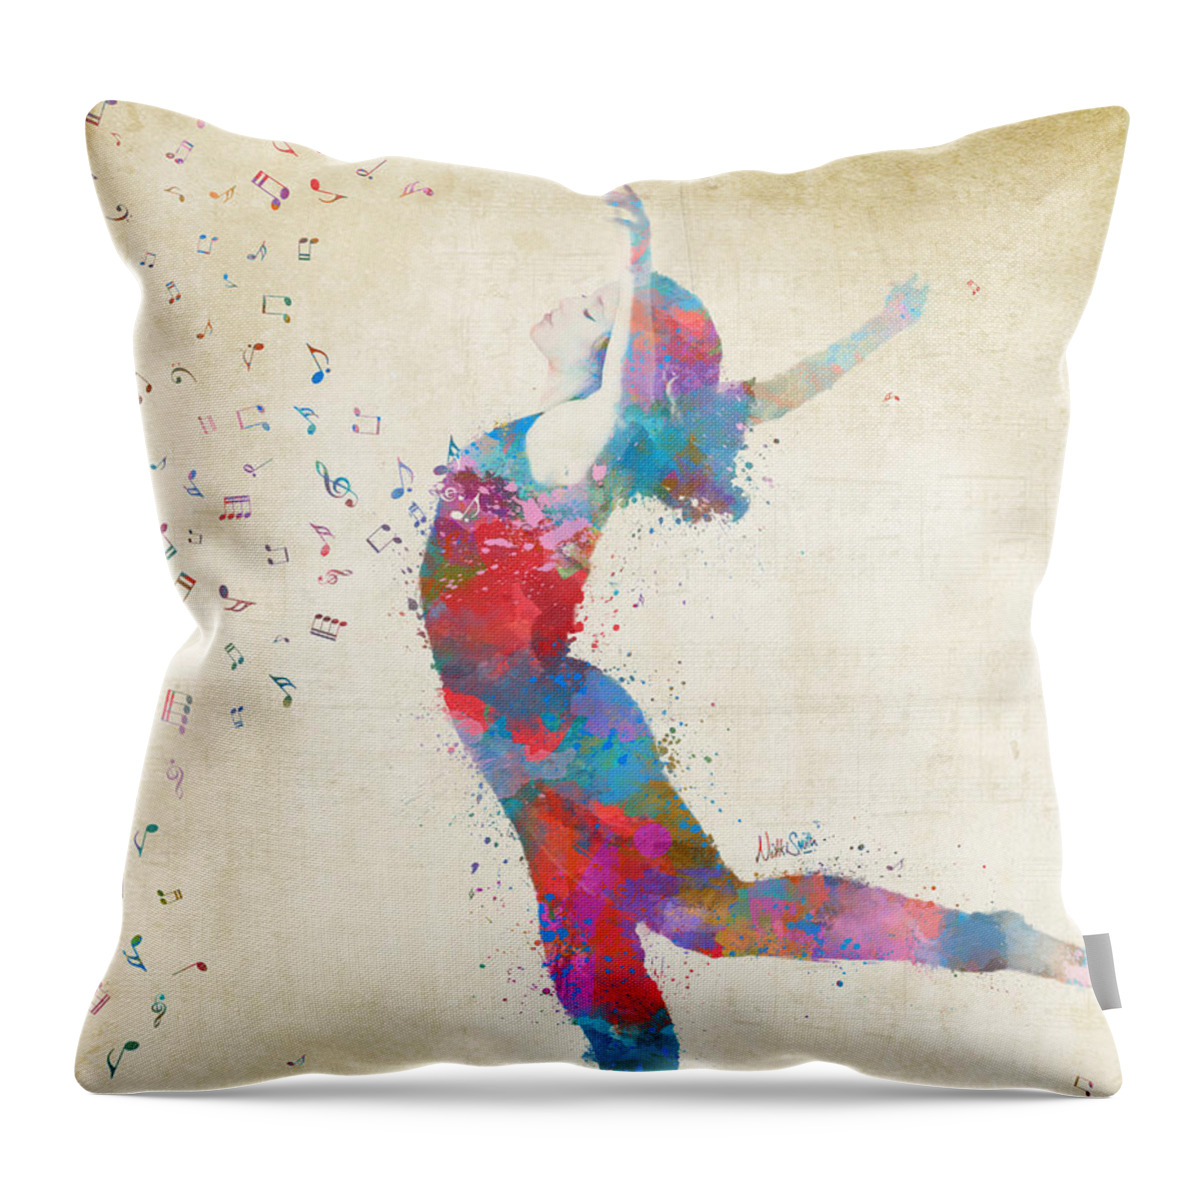 Music Throw Pillow featuring the digital art Beloved Deanna Radiating Love by Nikki Marie Smith